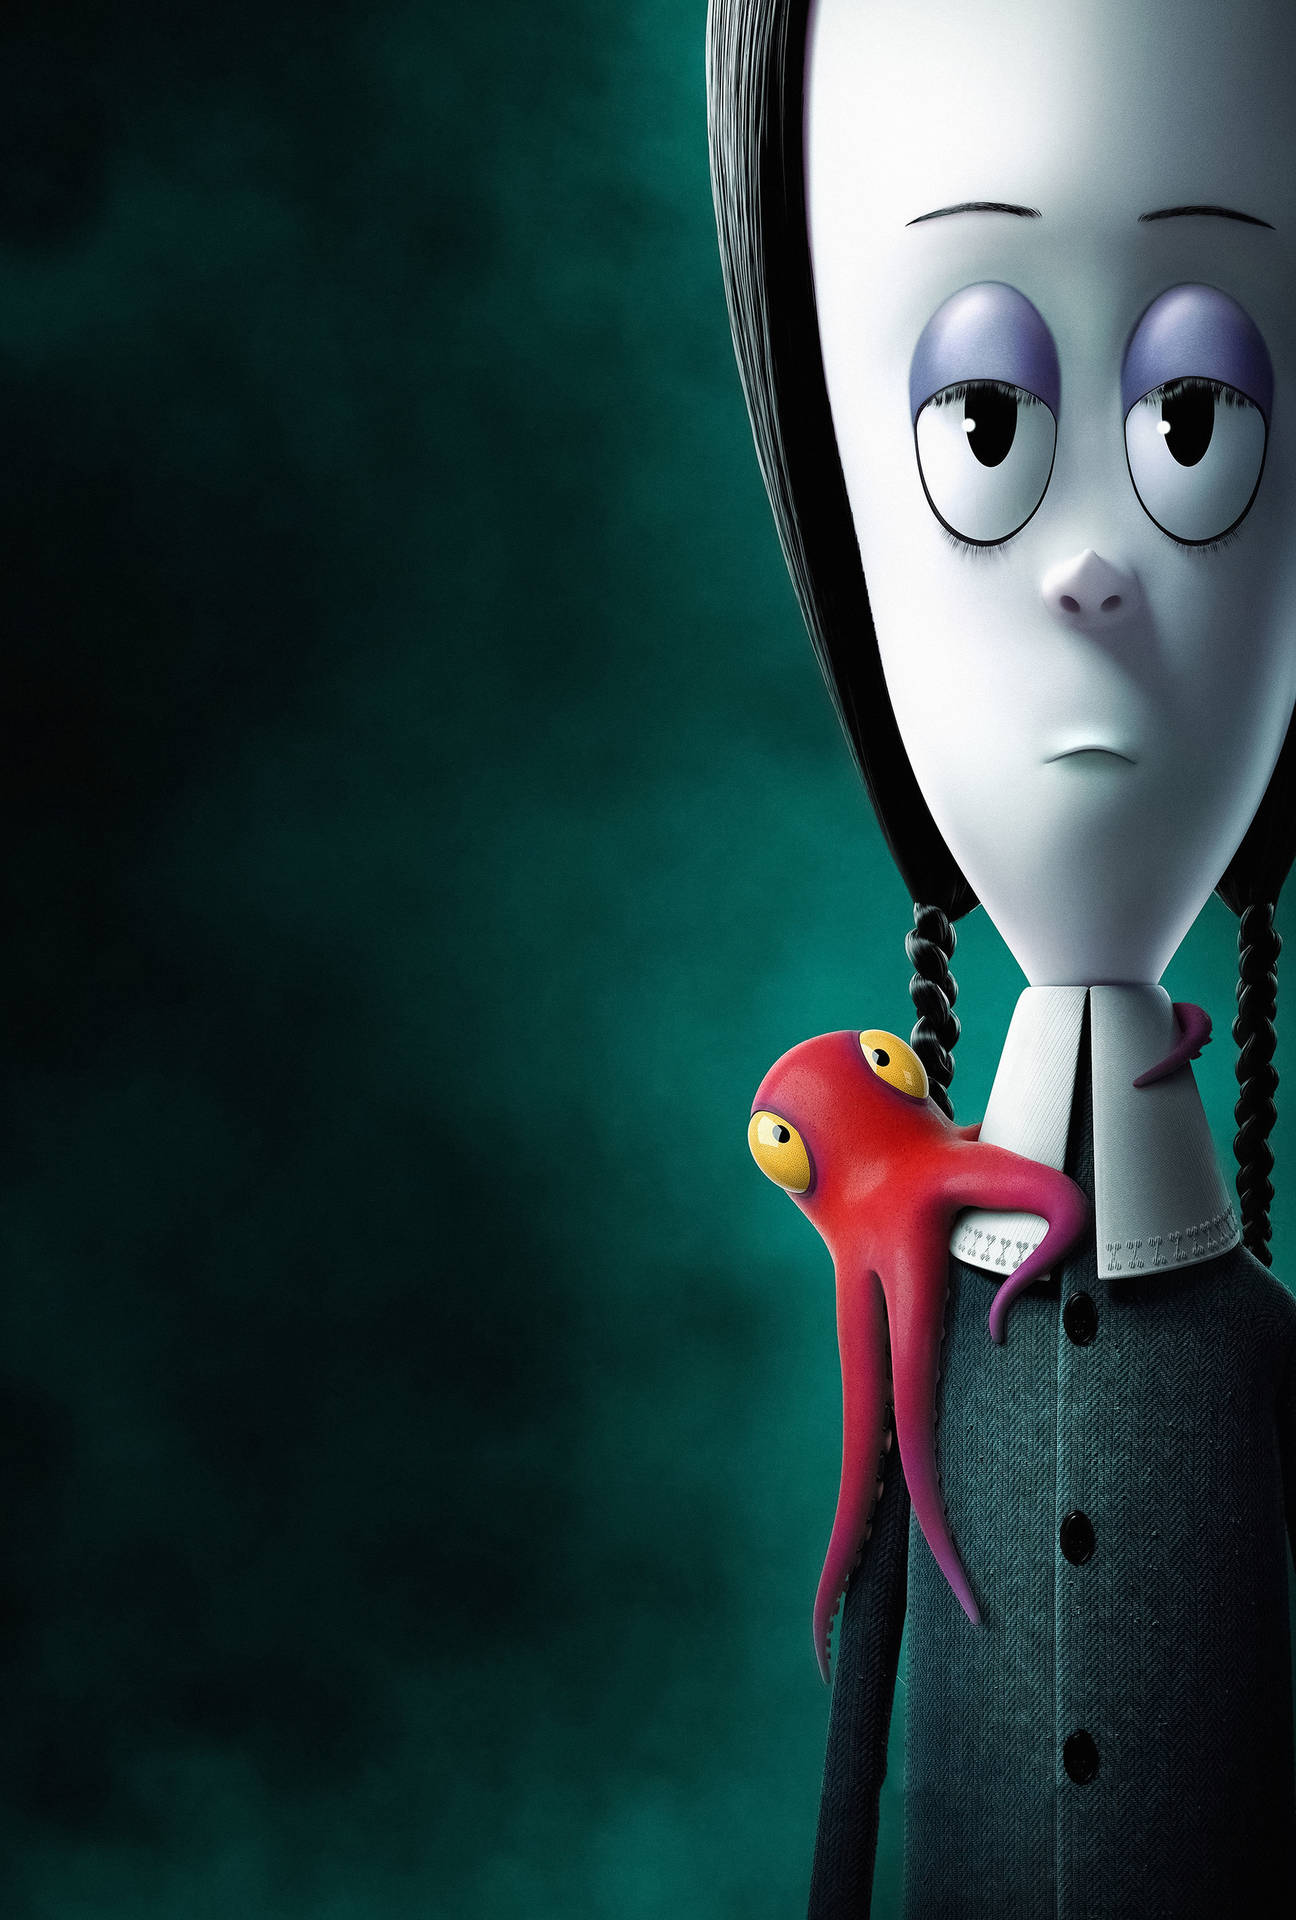 Wednesday Addams and Her Octopus Pal in The Addams Family 2 Wallpaper